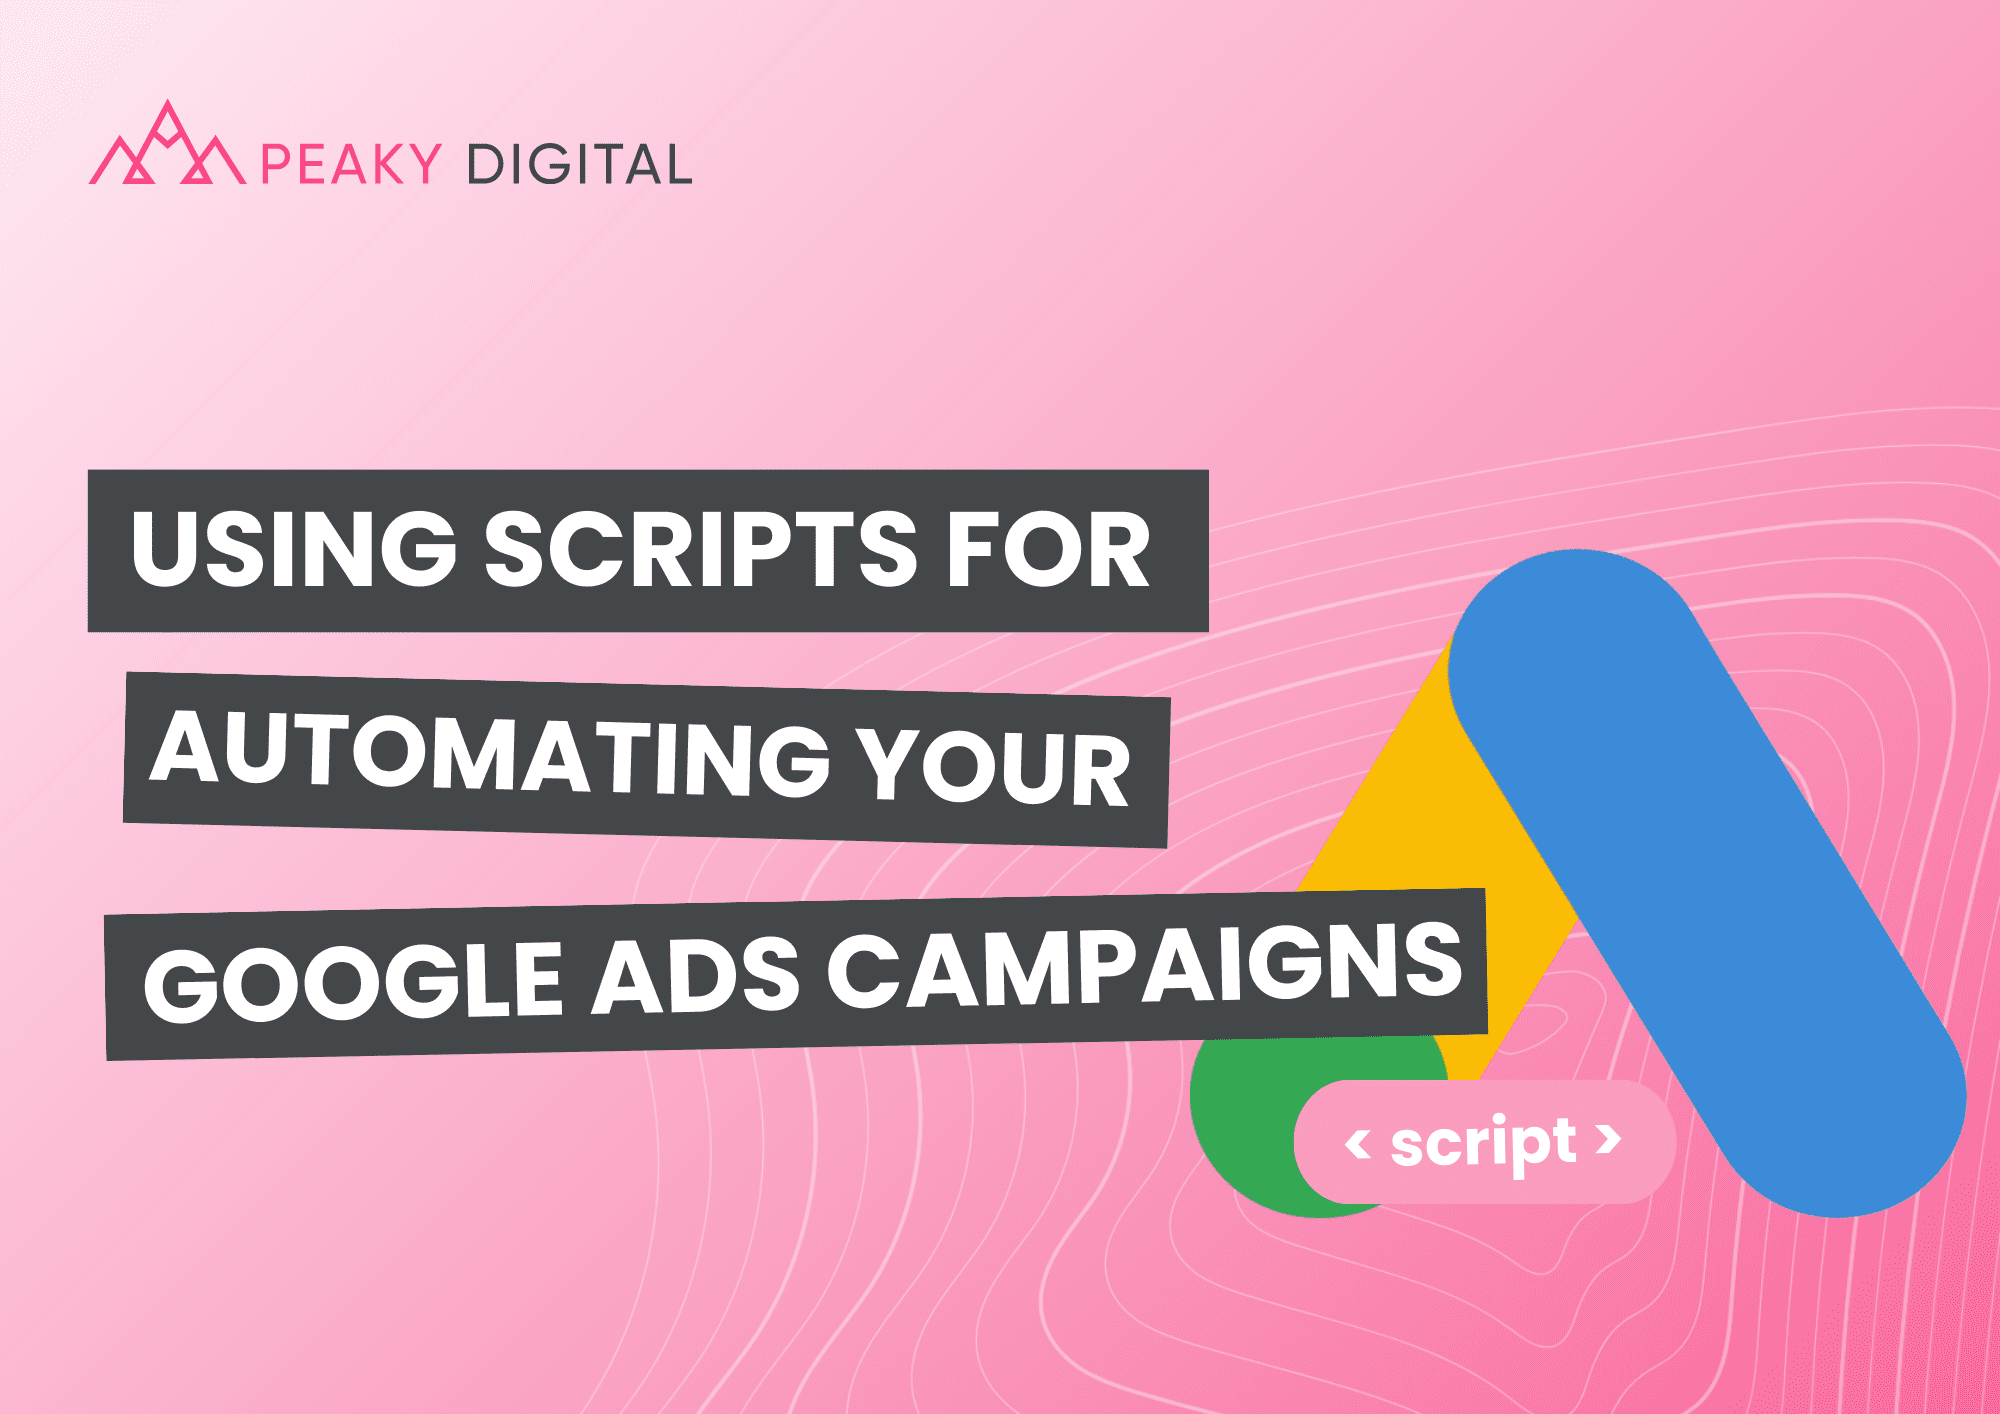 Using Scripts for Automating Your Google Ads Campaigns